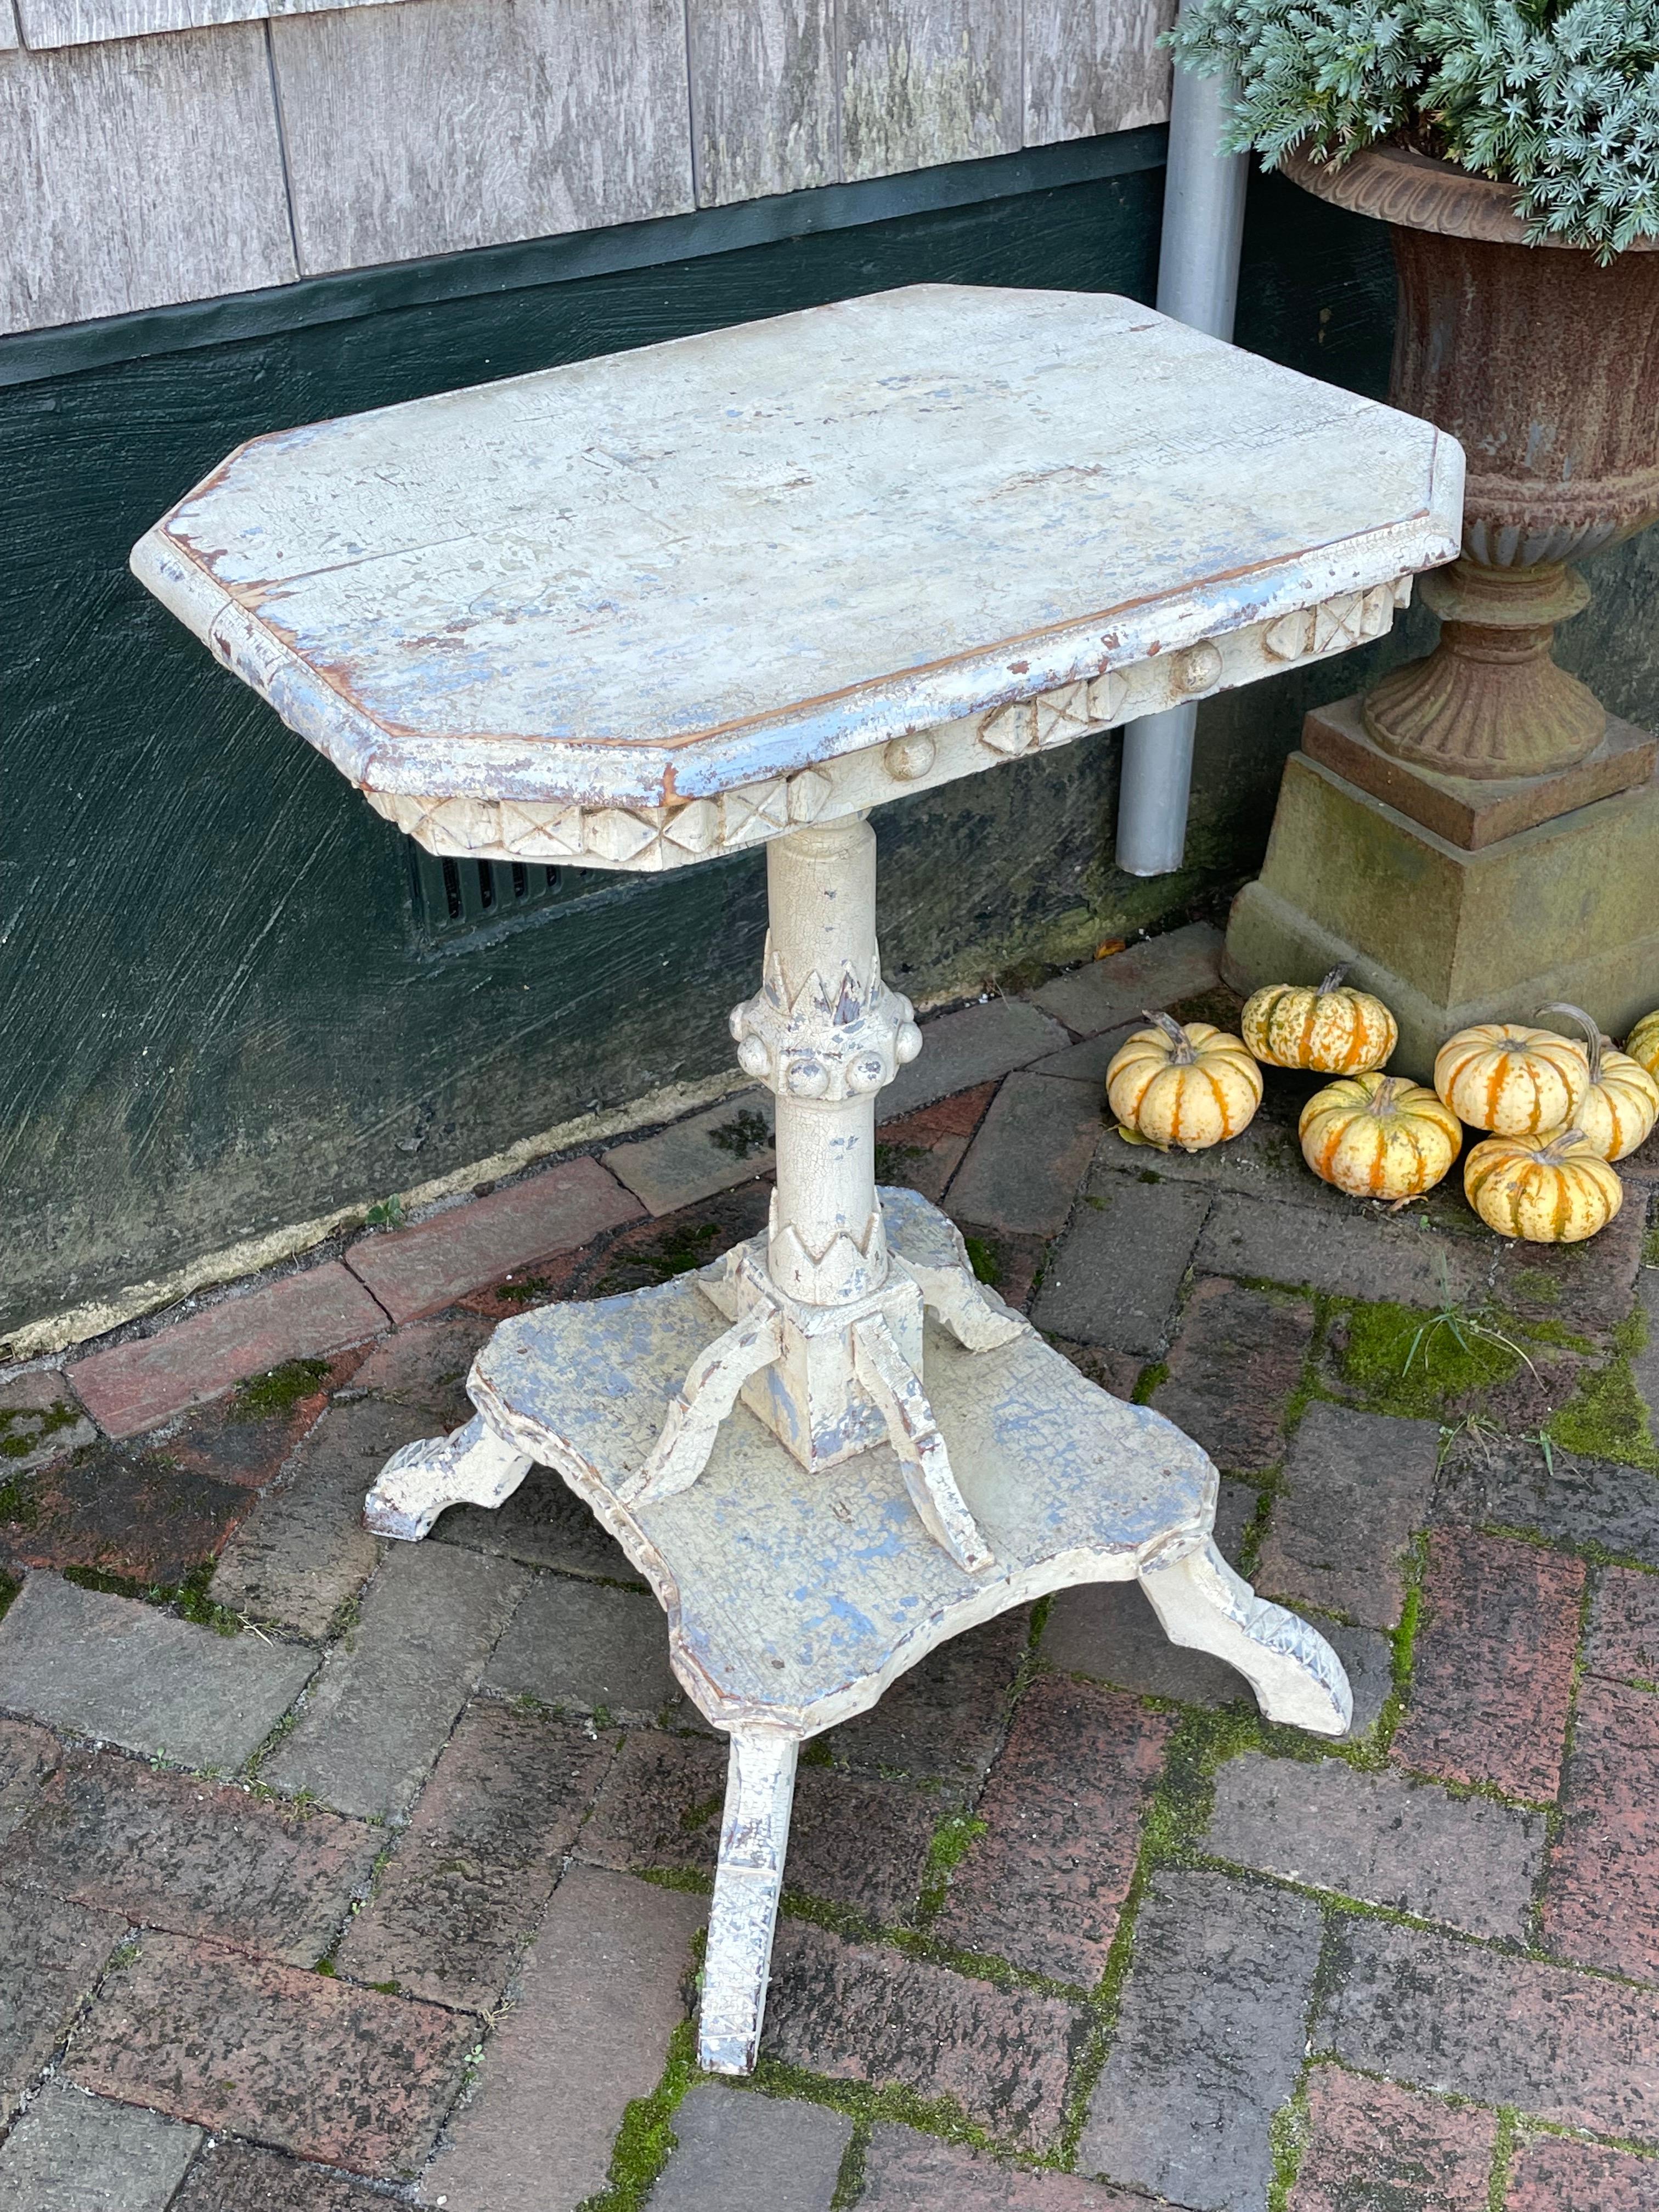 19th century Candle Stand in original white over light blue/grey paint, with all-over crazed surface.  Extensive decorative carvings on apron and pedestal base.  Quebec, circa 1880.